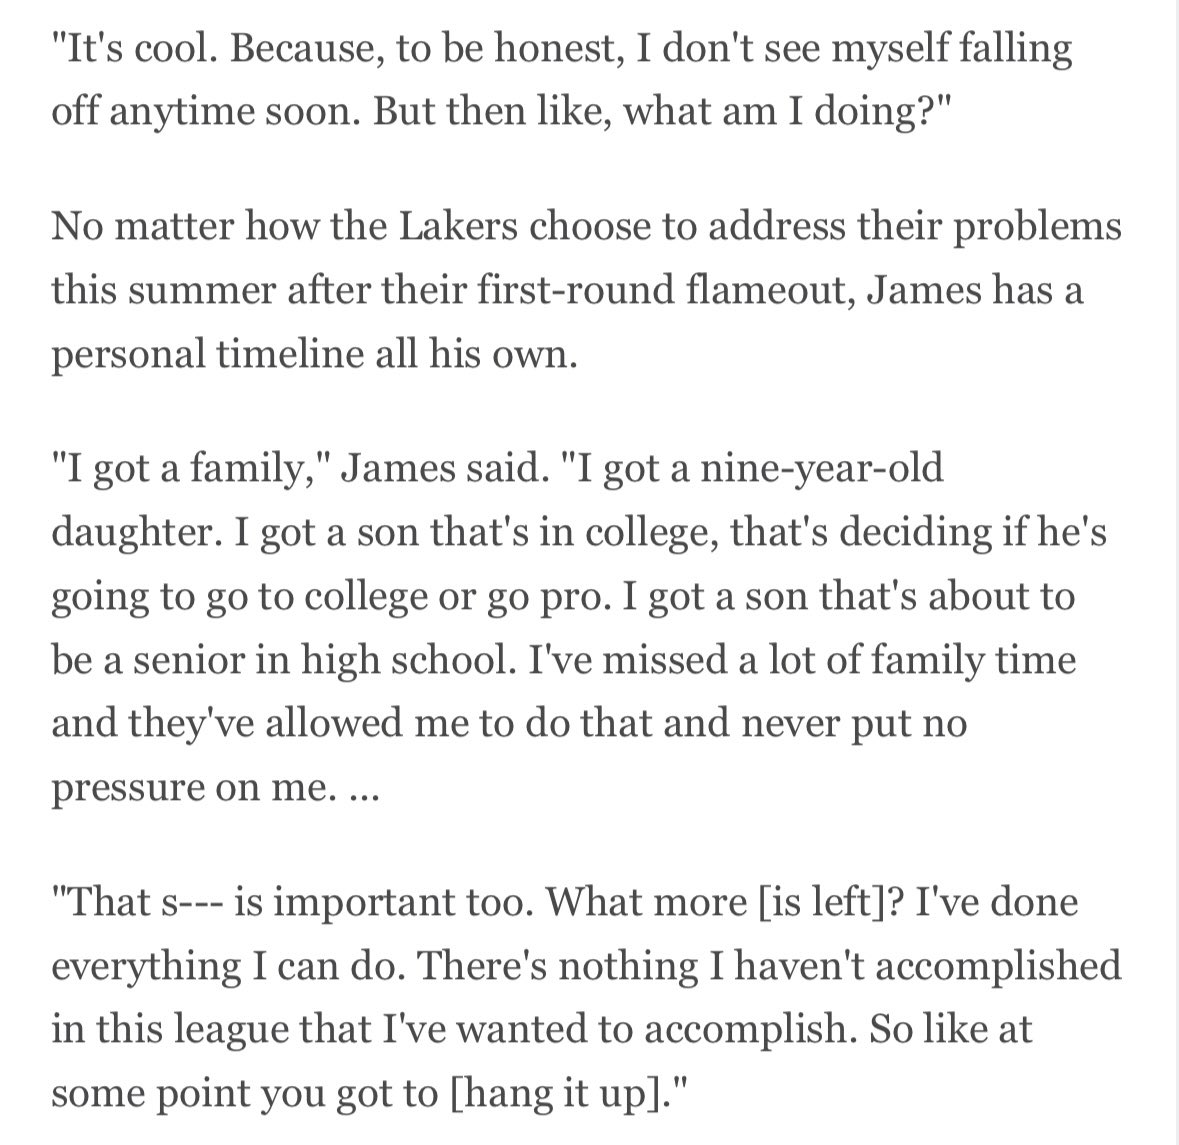 LeBron James spoke to ESPN late in the season about how long he would still like to play: